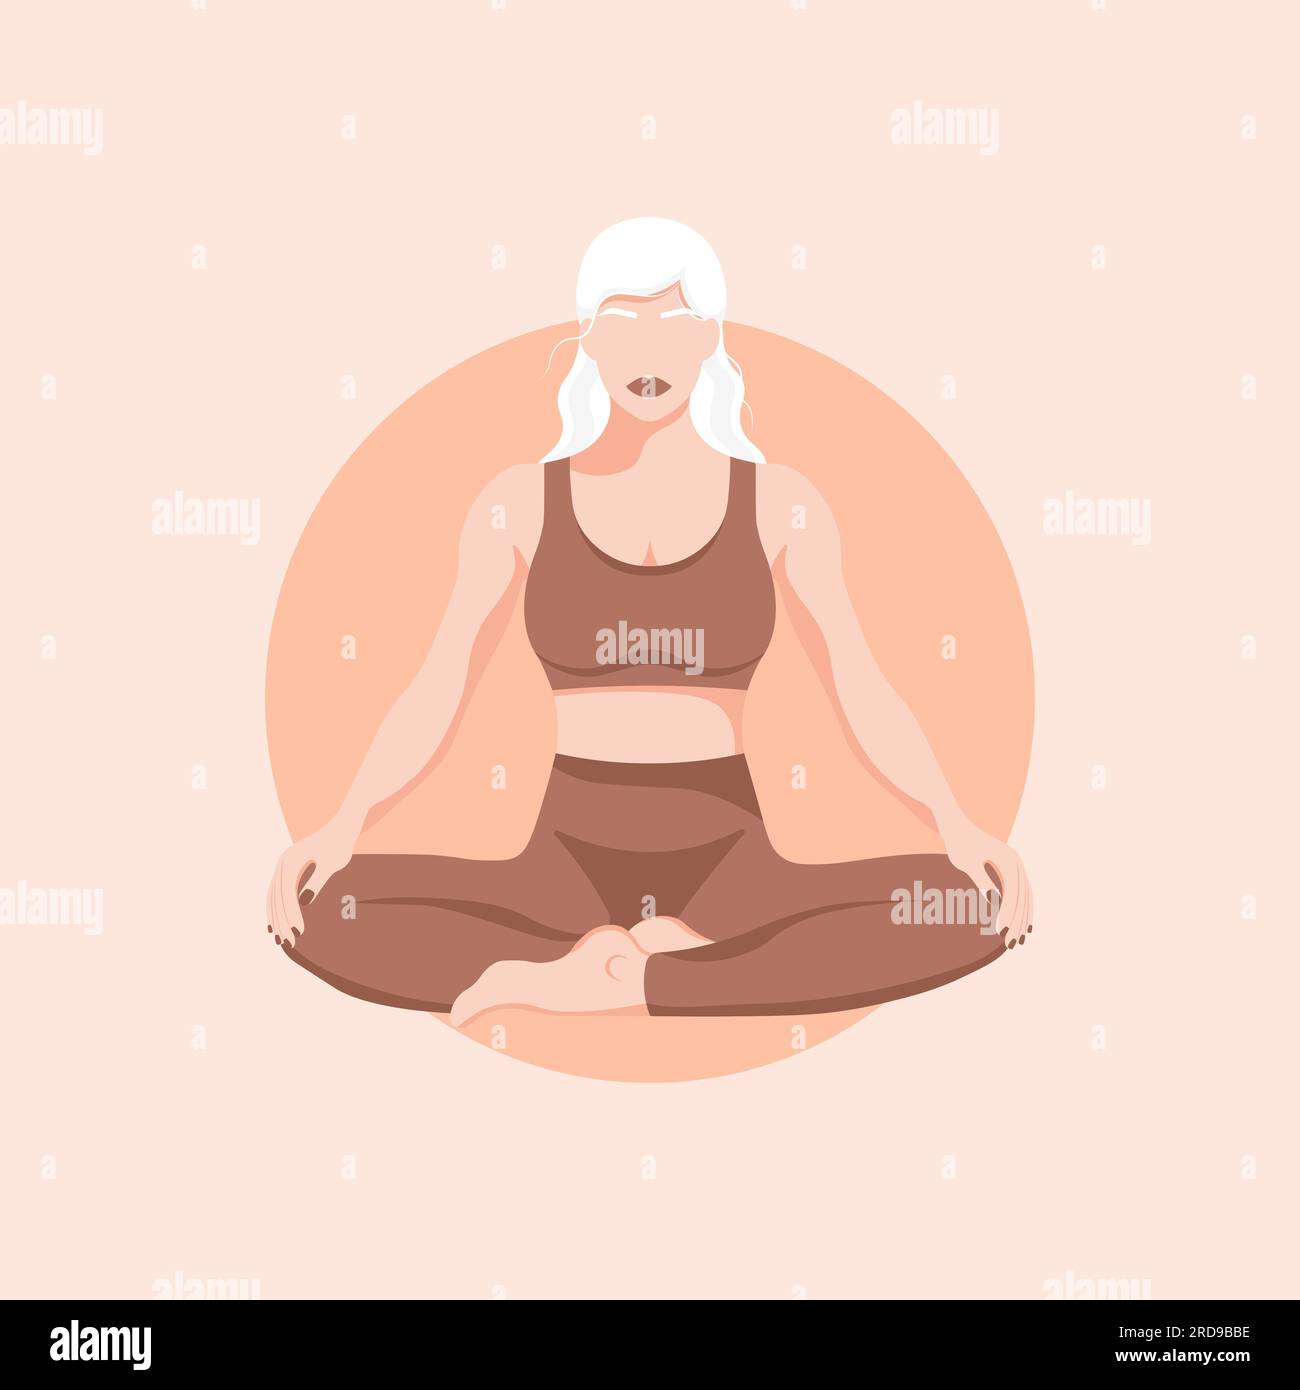 girl sitting in the lotus position. illustration of characters in flat style. the concept of yoga, relaxation, self-awareness. vector template.illustr Stock Vector